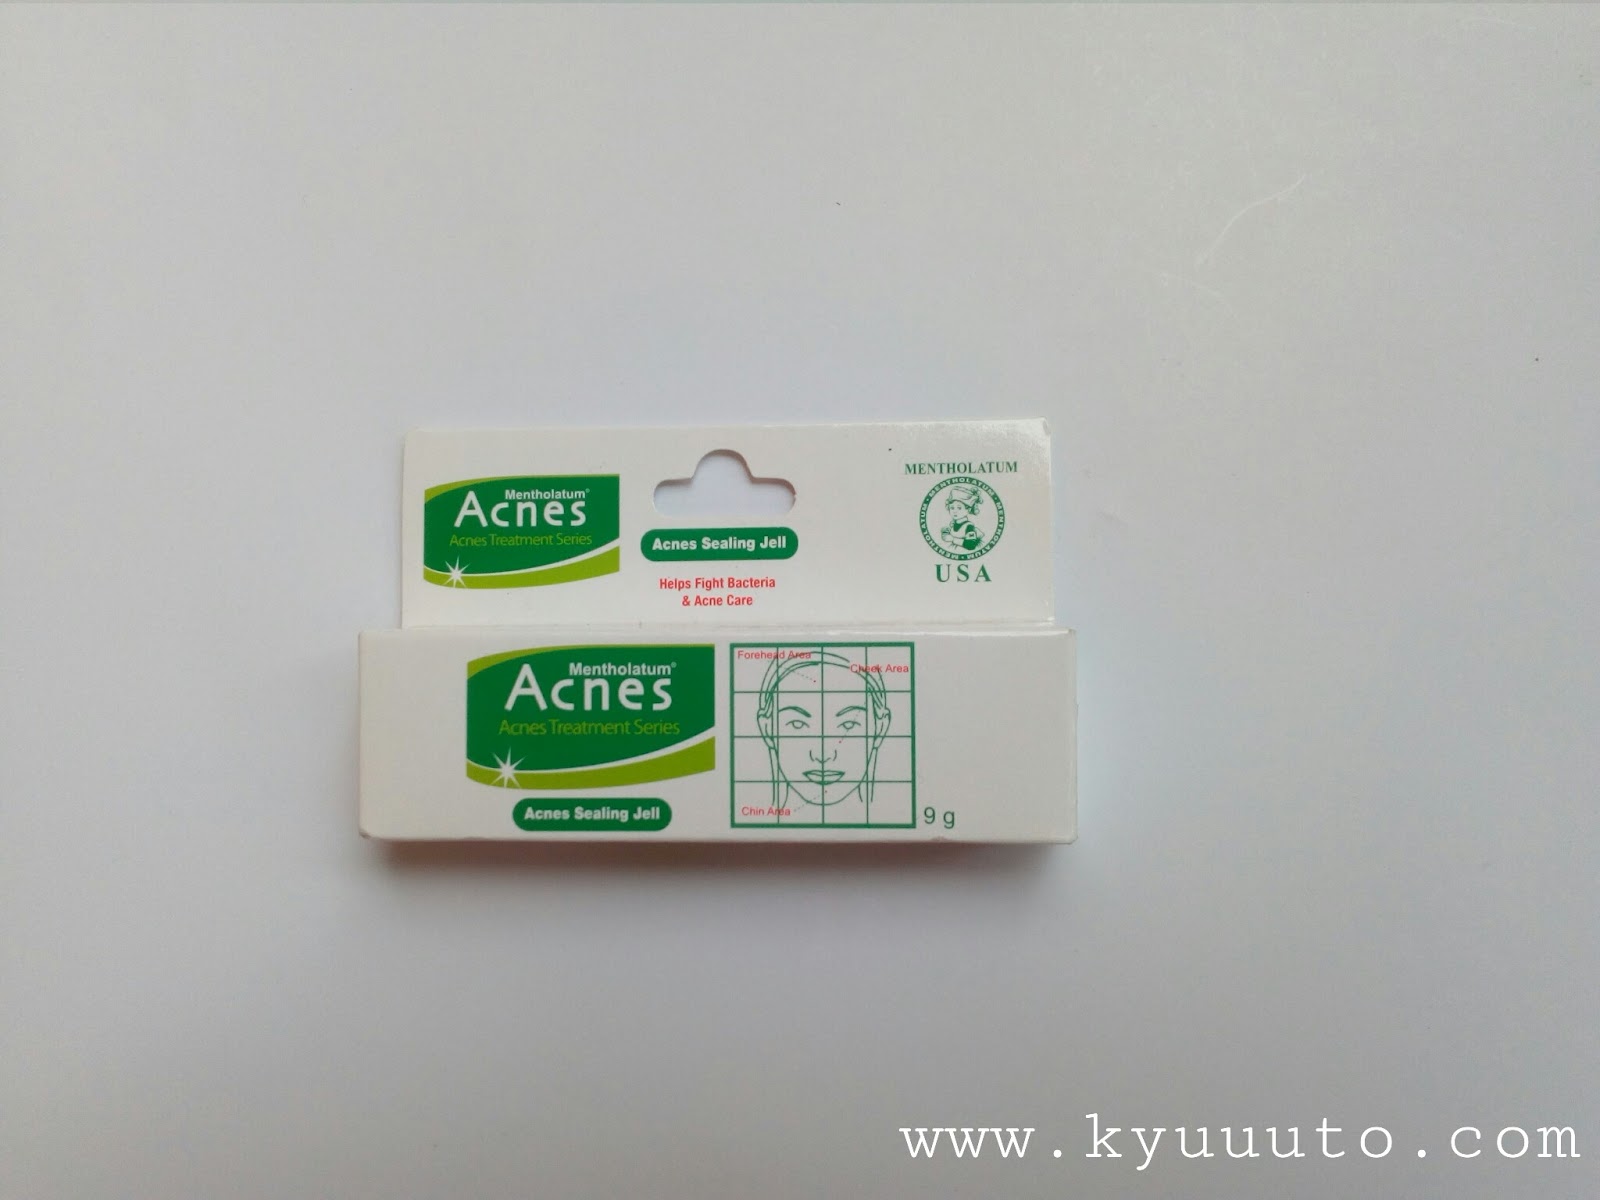 Review Jujur Acnes Sealing Jell Kyuuuto